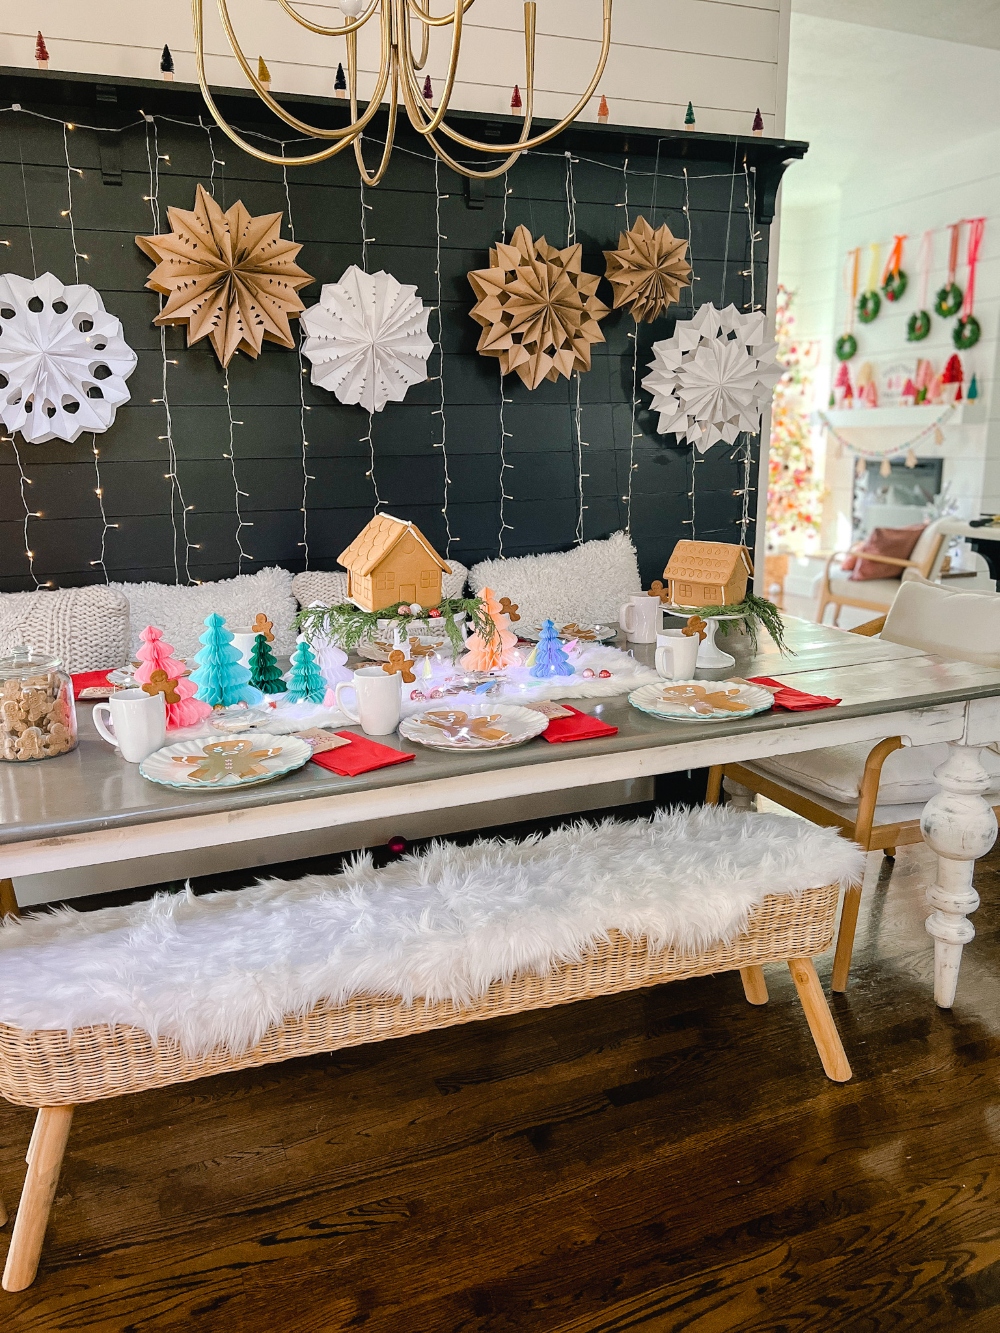 My Colorful Holiday Cottage Tour. Adding whimsical elements and colors to our historic home for the holidays with easy DIY ideas! 